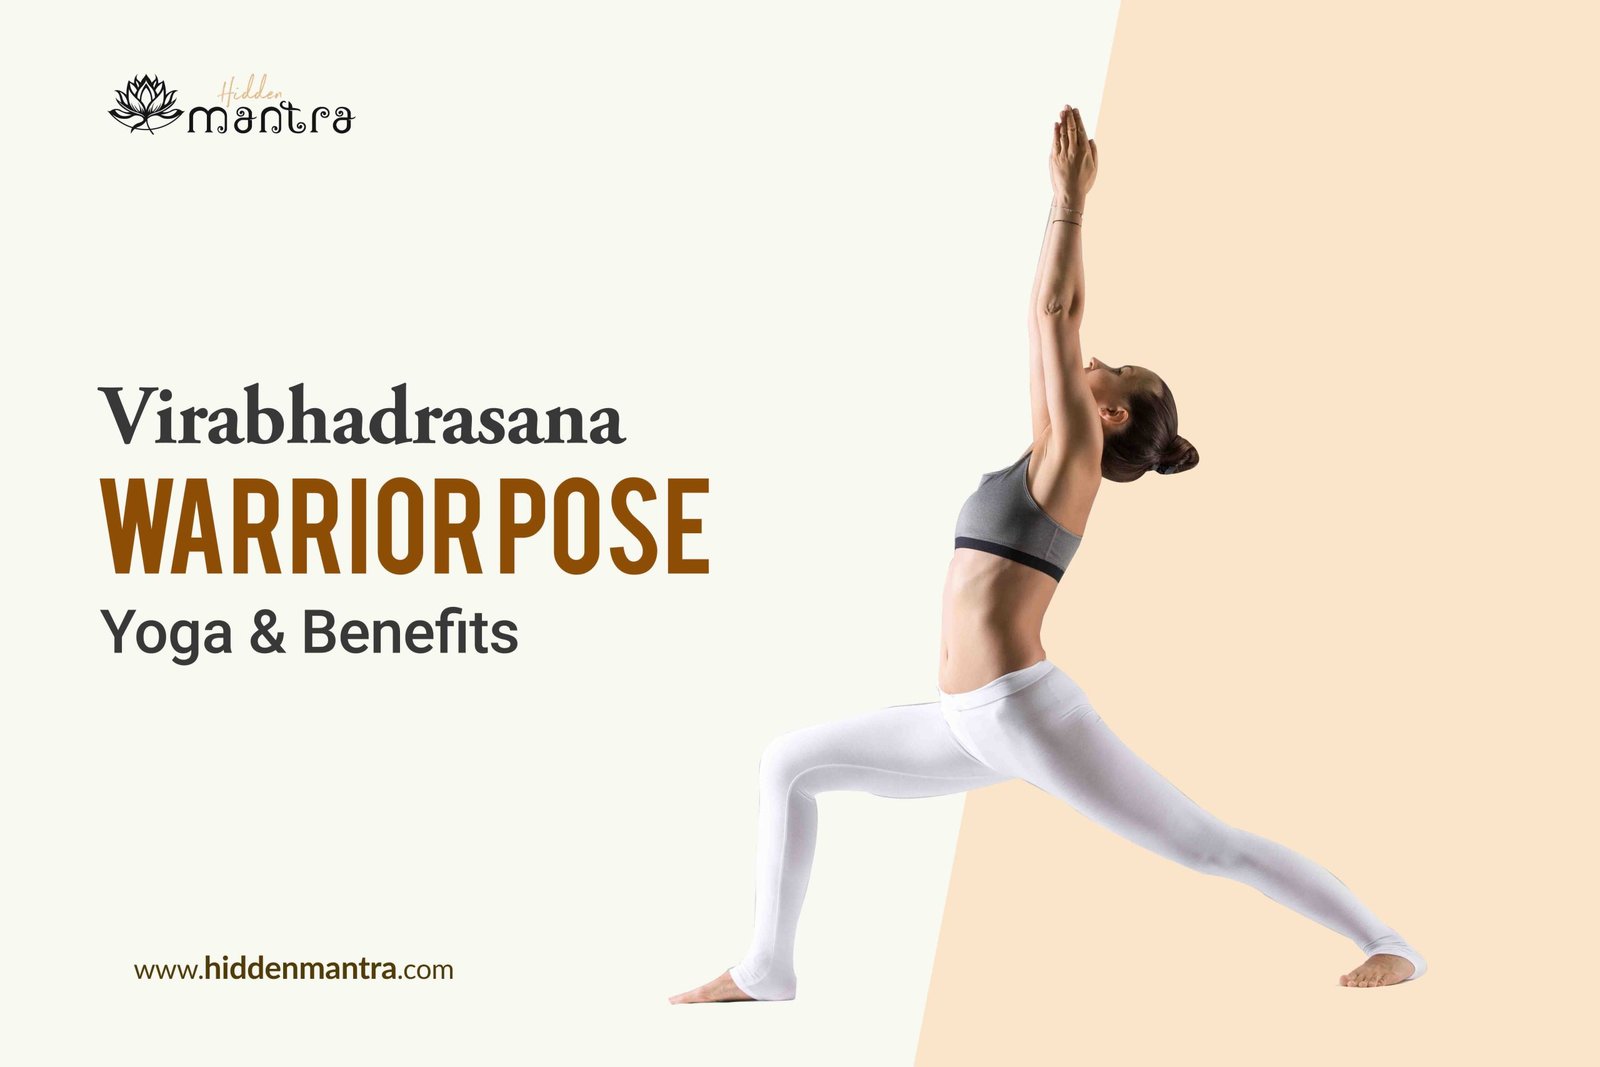 Overcome Nervousness and Frustration with Yoga